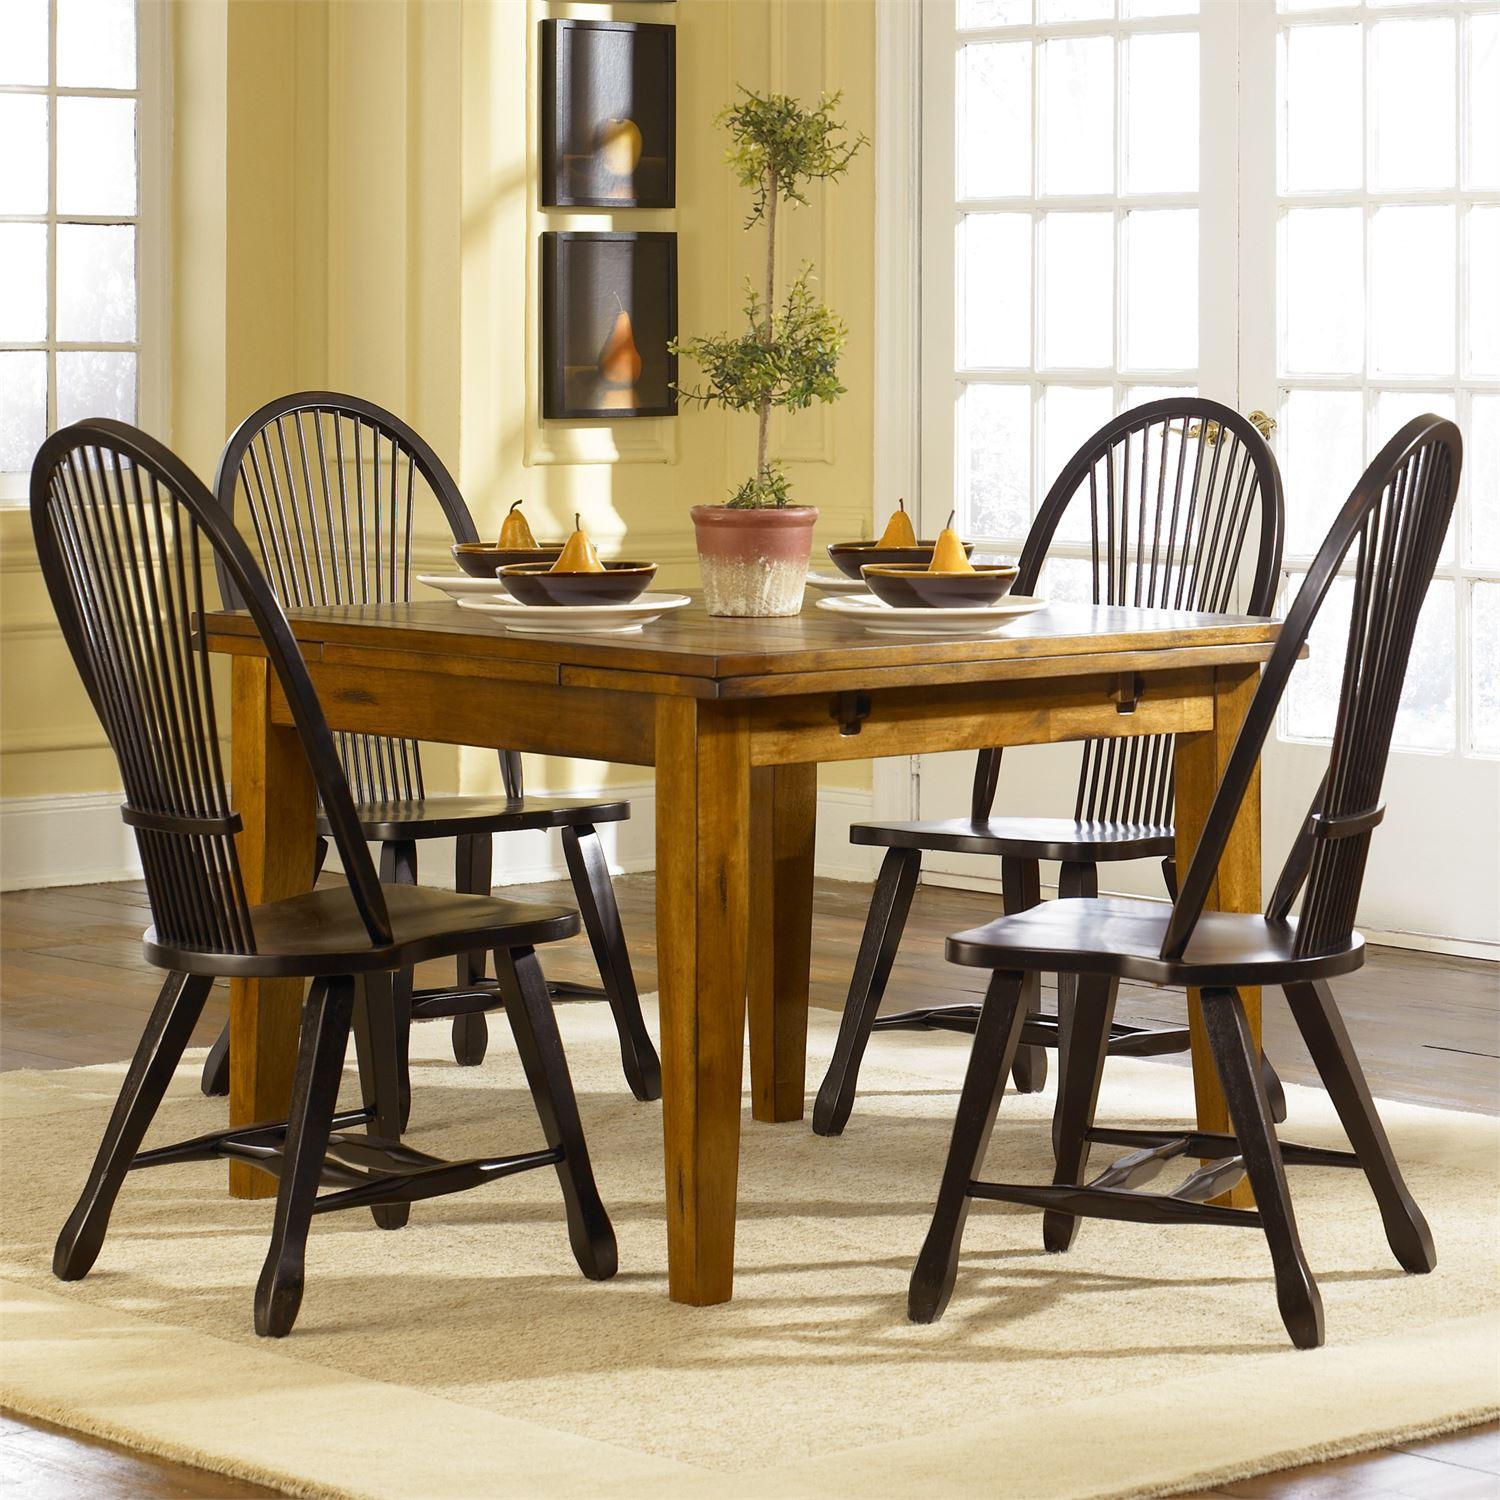 Traditional Dining Room Set Treasures  (17-CD) Dining Room Set 17-CD-O5RTS in Oak Veneers, Brown, Black Lacquer